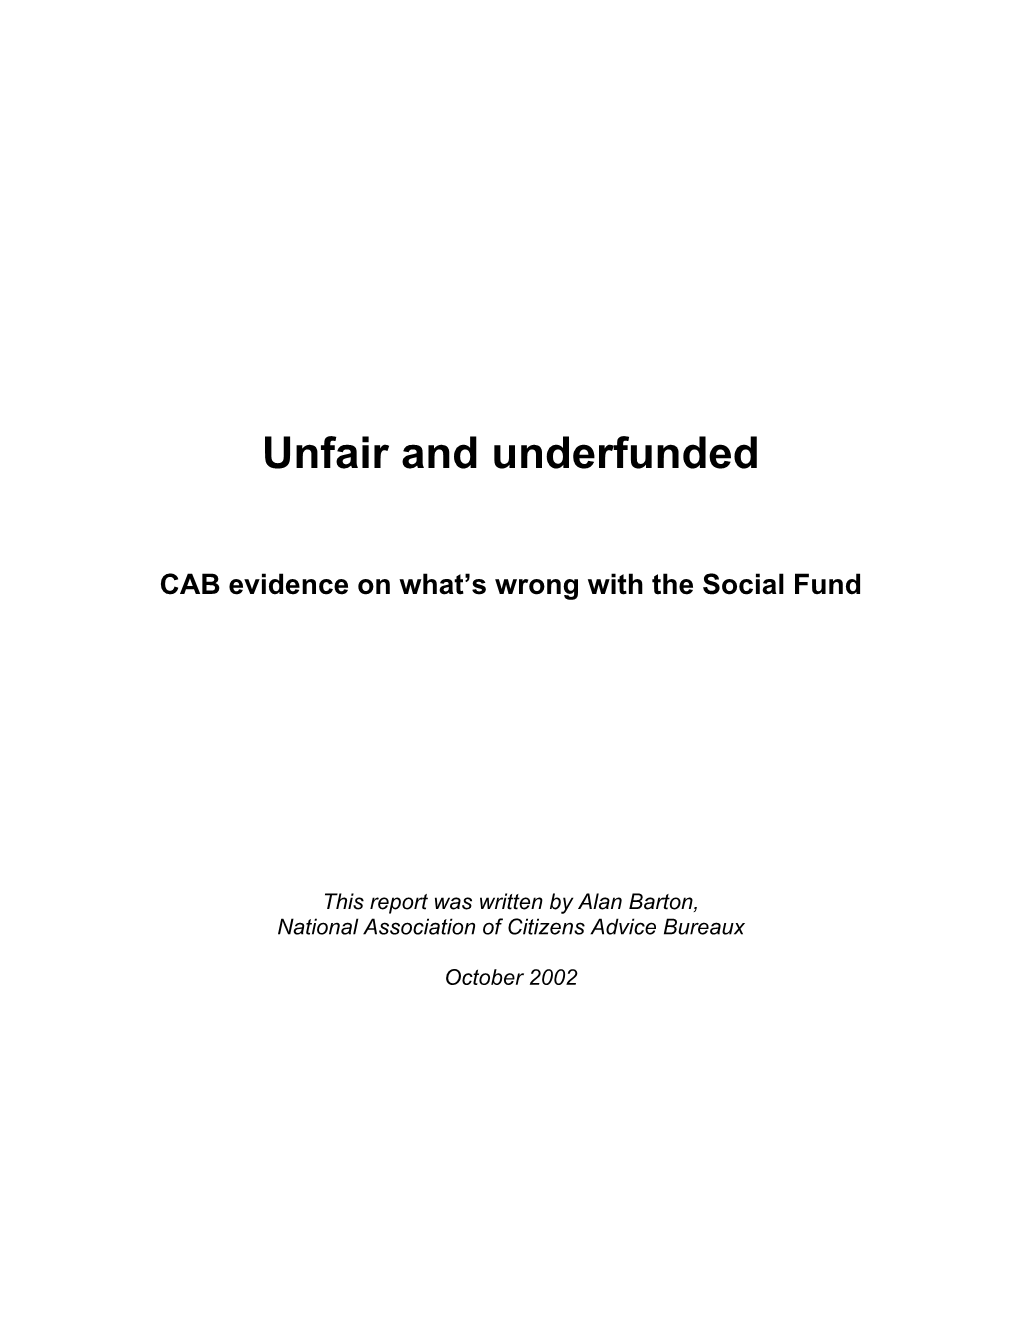 Unfair and Underfunded